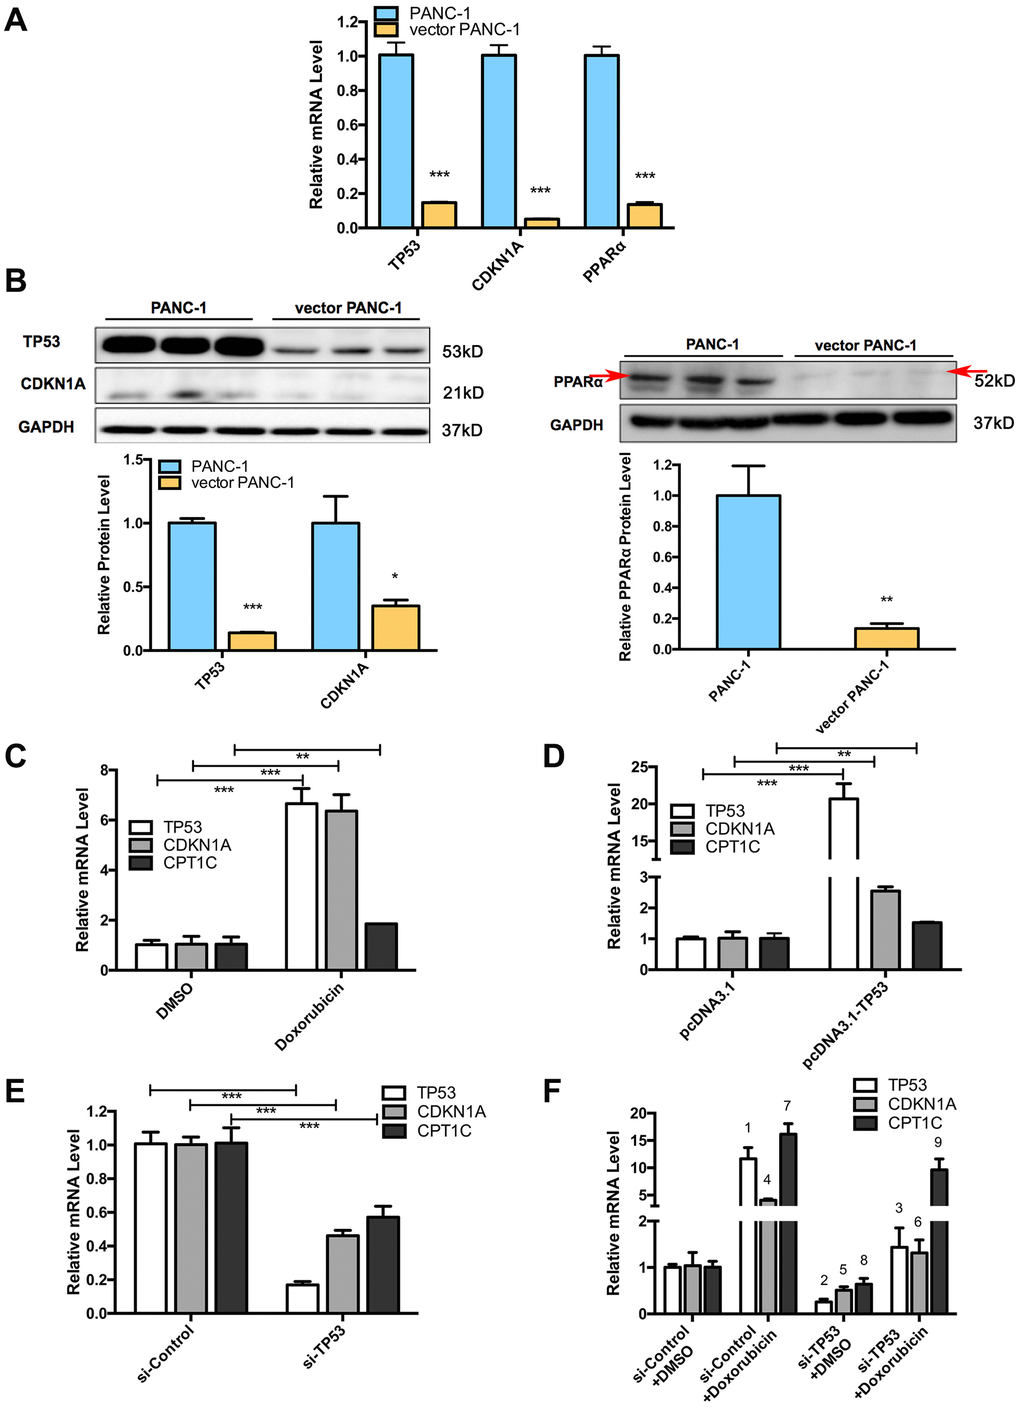 Signaling pathways involved in low-CPT1C-expression-induced senescence in vector PANC-1 cells and regulation of the TP53 signaling pathway on CPT1C. (A) Quantitative RT-PCR analysis for suppressed genes in senescent vector PANC-1 cells. Data are presented as the mean ± S.E.M, n = 3 (***p B) Images and densitometric analysis for protein bands altered in senescent vector PANC-1 cells. The left panel shared the same GAPDH control with Figure 2D, all these bands were harvested from the same experiment. Data are presented as the mean ± S.E.M, n = 3 (*p p p C) The CPT1C mRNA level is upregulated after inducing TP53 mRNA expression with 0.7 μM doxorubicin (Sigma) for 24 h in PANC-1 cells. (D) CPT1C mRNA is increased after overexpressing 2 μg of TP53 plasmids for 24 h in PANC-1 cells. (E) CPT1C mRNA expression was downregulated after knockdown of TP53 mRNA expression with 50 μM si-TP53 for 72 h in PANC-1 cells. The sequences of specific human siRNAs were commercially available (RiboBio) and listed in Supplementary Table 2. The optimal sense against TP53 was the following: 5'-GCACAGAGGAAGAGAAUCU dTdT-3'. (F) Doxorubicin reversed the si-TP53-induced downregulation of CPT1C mRNA expression. For the statistical analysis of TP53 mRNA expression, 1 si-Control+Doxorubicin vs si-Control+DMSO, ***p 2 si-TP53+DMSO vs si-Control+DMSO, ***p 3 si-TP53+Doxorubicin vs si-TP53+DMSO, **p CDKN1A/P53 mRNA level, 4 si-Control+Doxorubicin vs si-Control+DMSO, ***p 5 si-TP53+DMSO vs si-Control+DMSO, *p 6 si-TP53+Doxorubicin vs si-TP53+DMSO, **p CPT1C mRNA expression, 7 si-Control+Doxorubicin vs si-Control+DMSO, ***p 8 si-TP53+DMSO vs si-Control+DMSO, *p 9 si-TP53+Doxorubicin vs si-TP53+DMSO, **p Supplementary Figure 7.